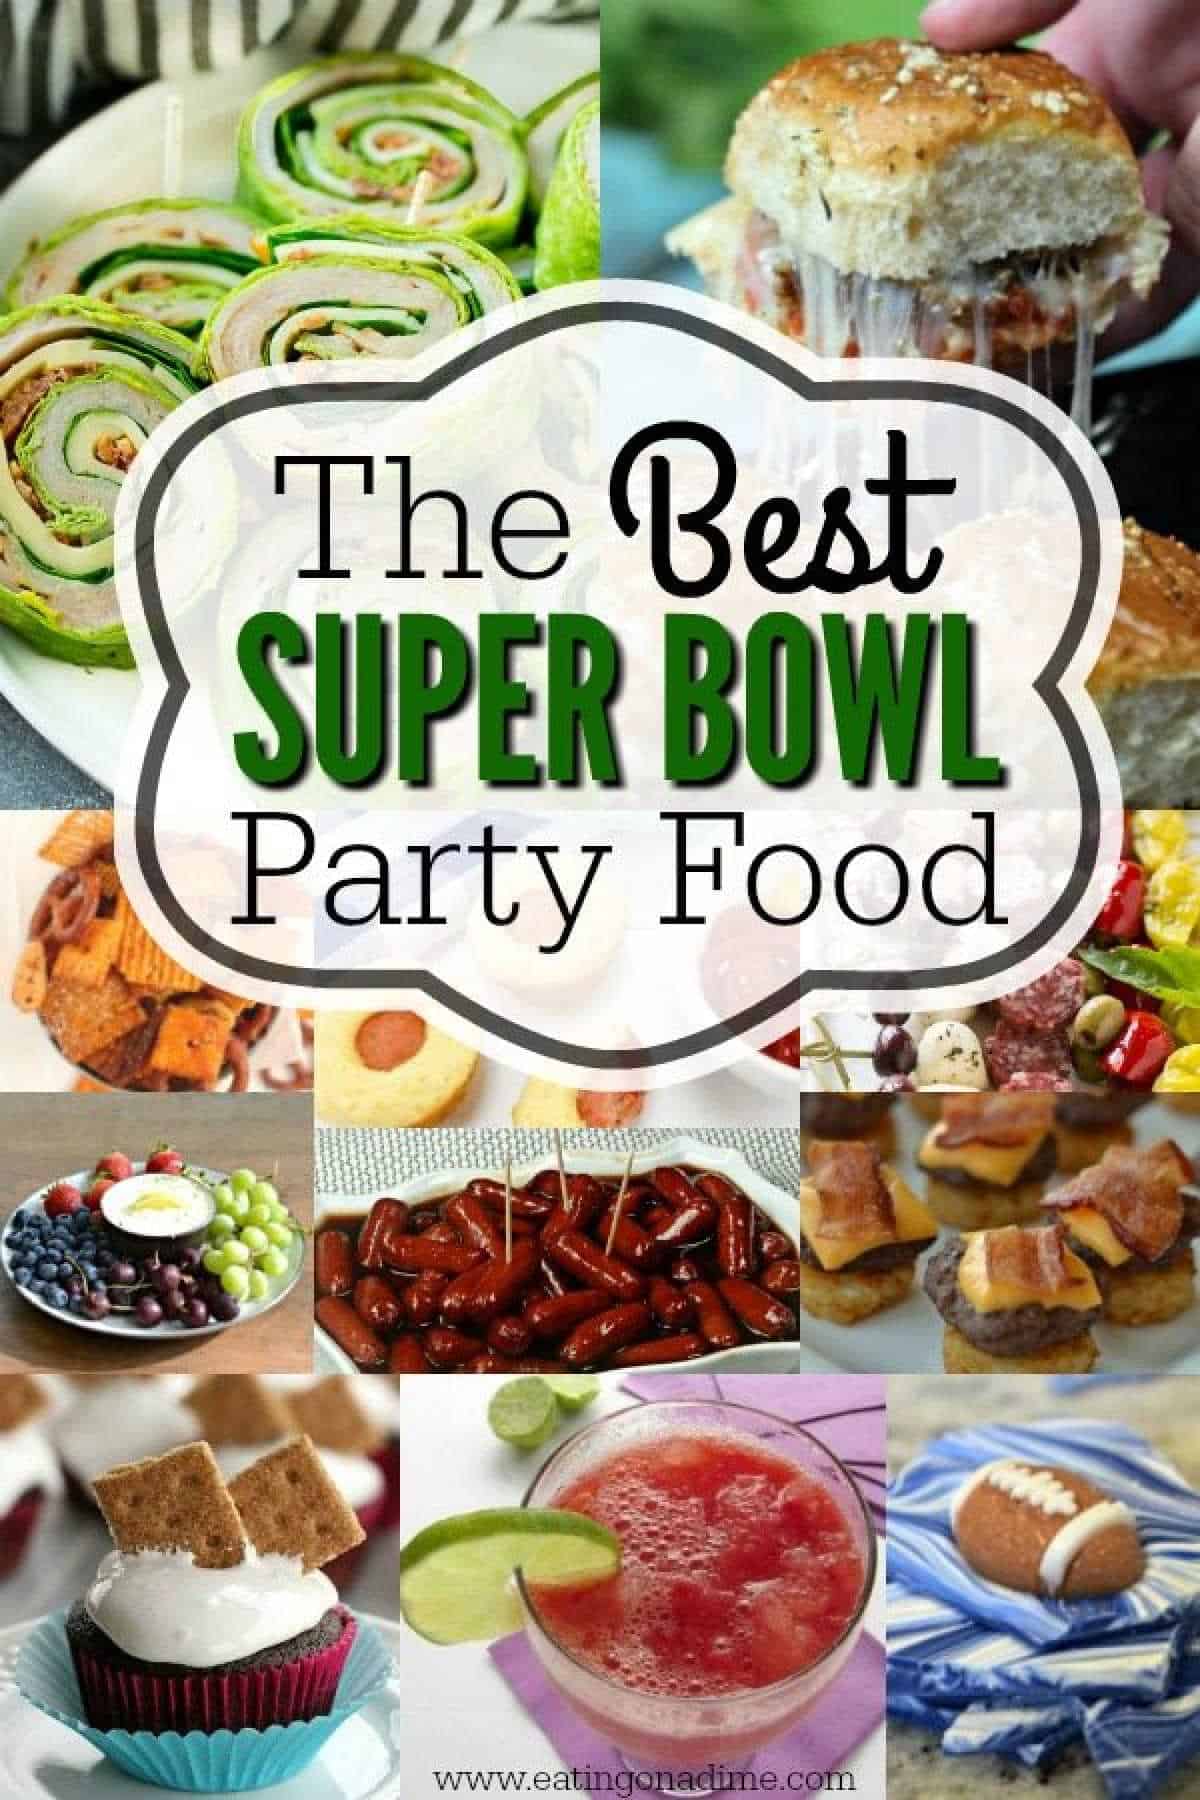 Find tons of super bowl party food menu ideas. 75 Super Bowl recipes to feed a crowd. Superbowl food from appetizers, main dish and dessert!